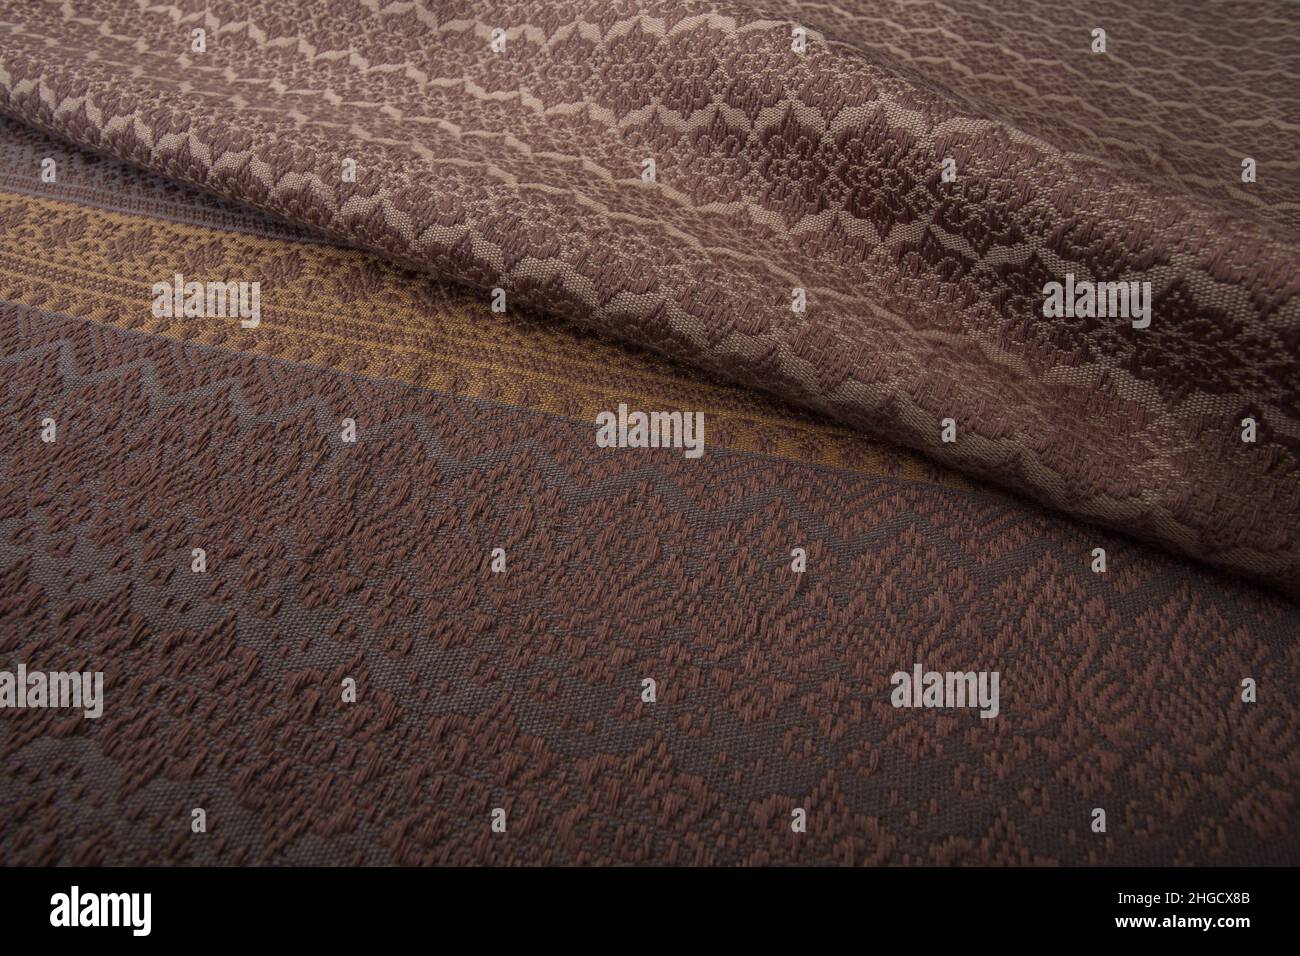 Close up of texture of Thai cotton knitted seamless pattern fabric. Thai cotton detail textured textile. Stock Photo